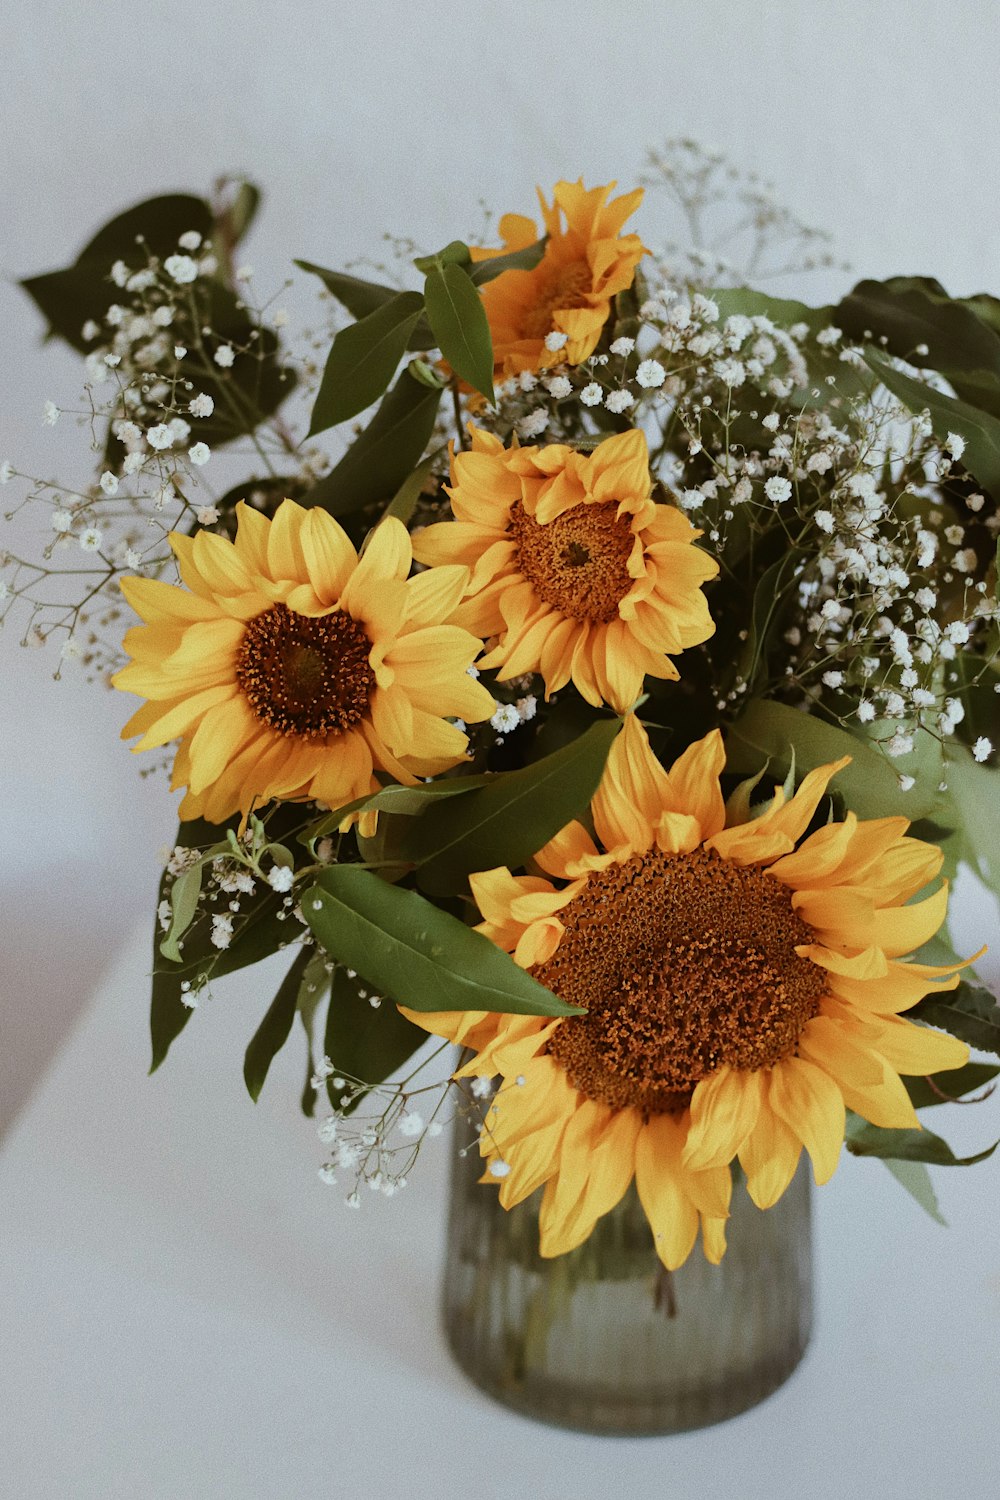 a vase filled with yellow sunflowers and baby's breath